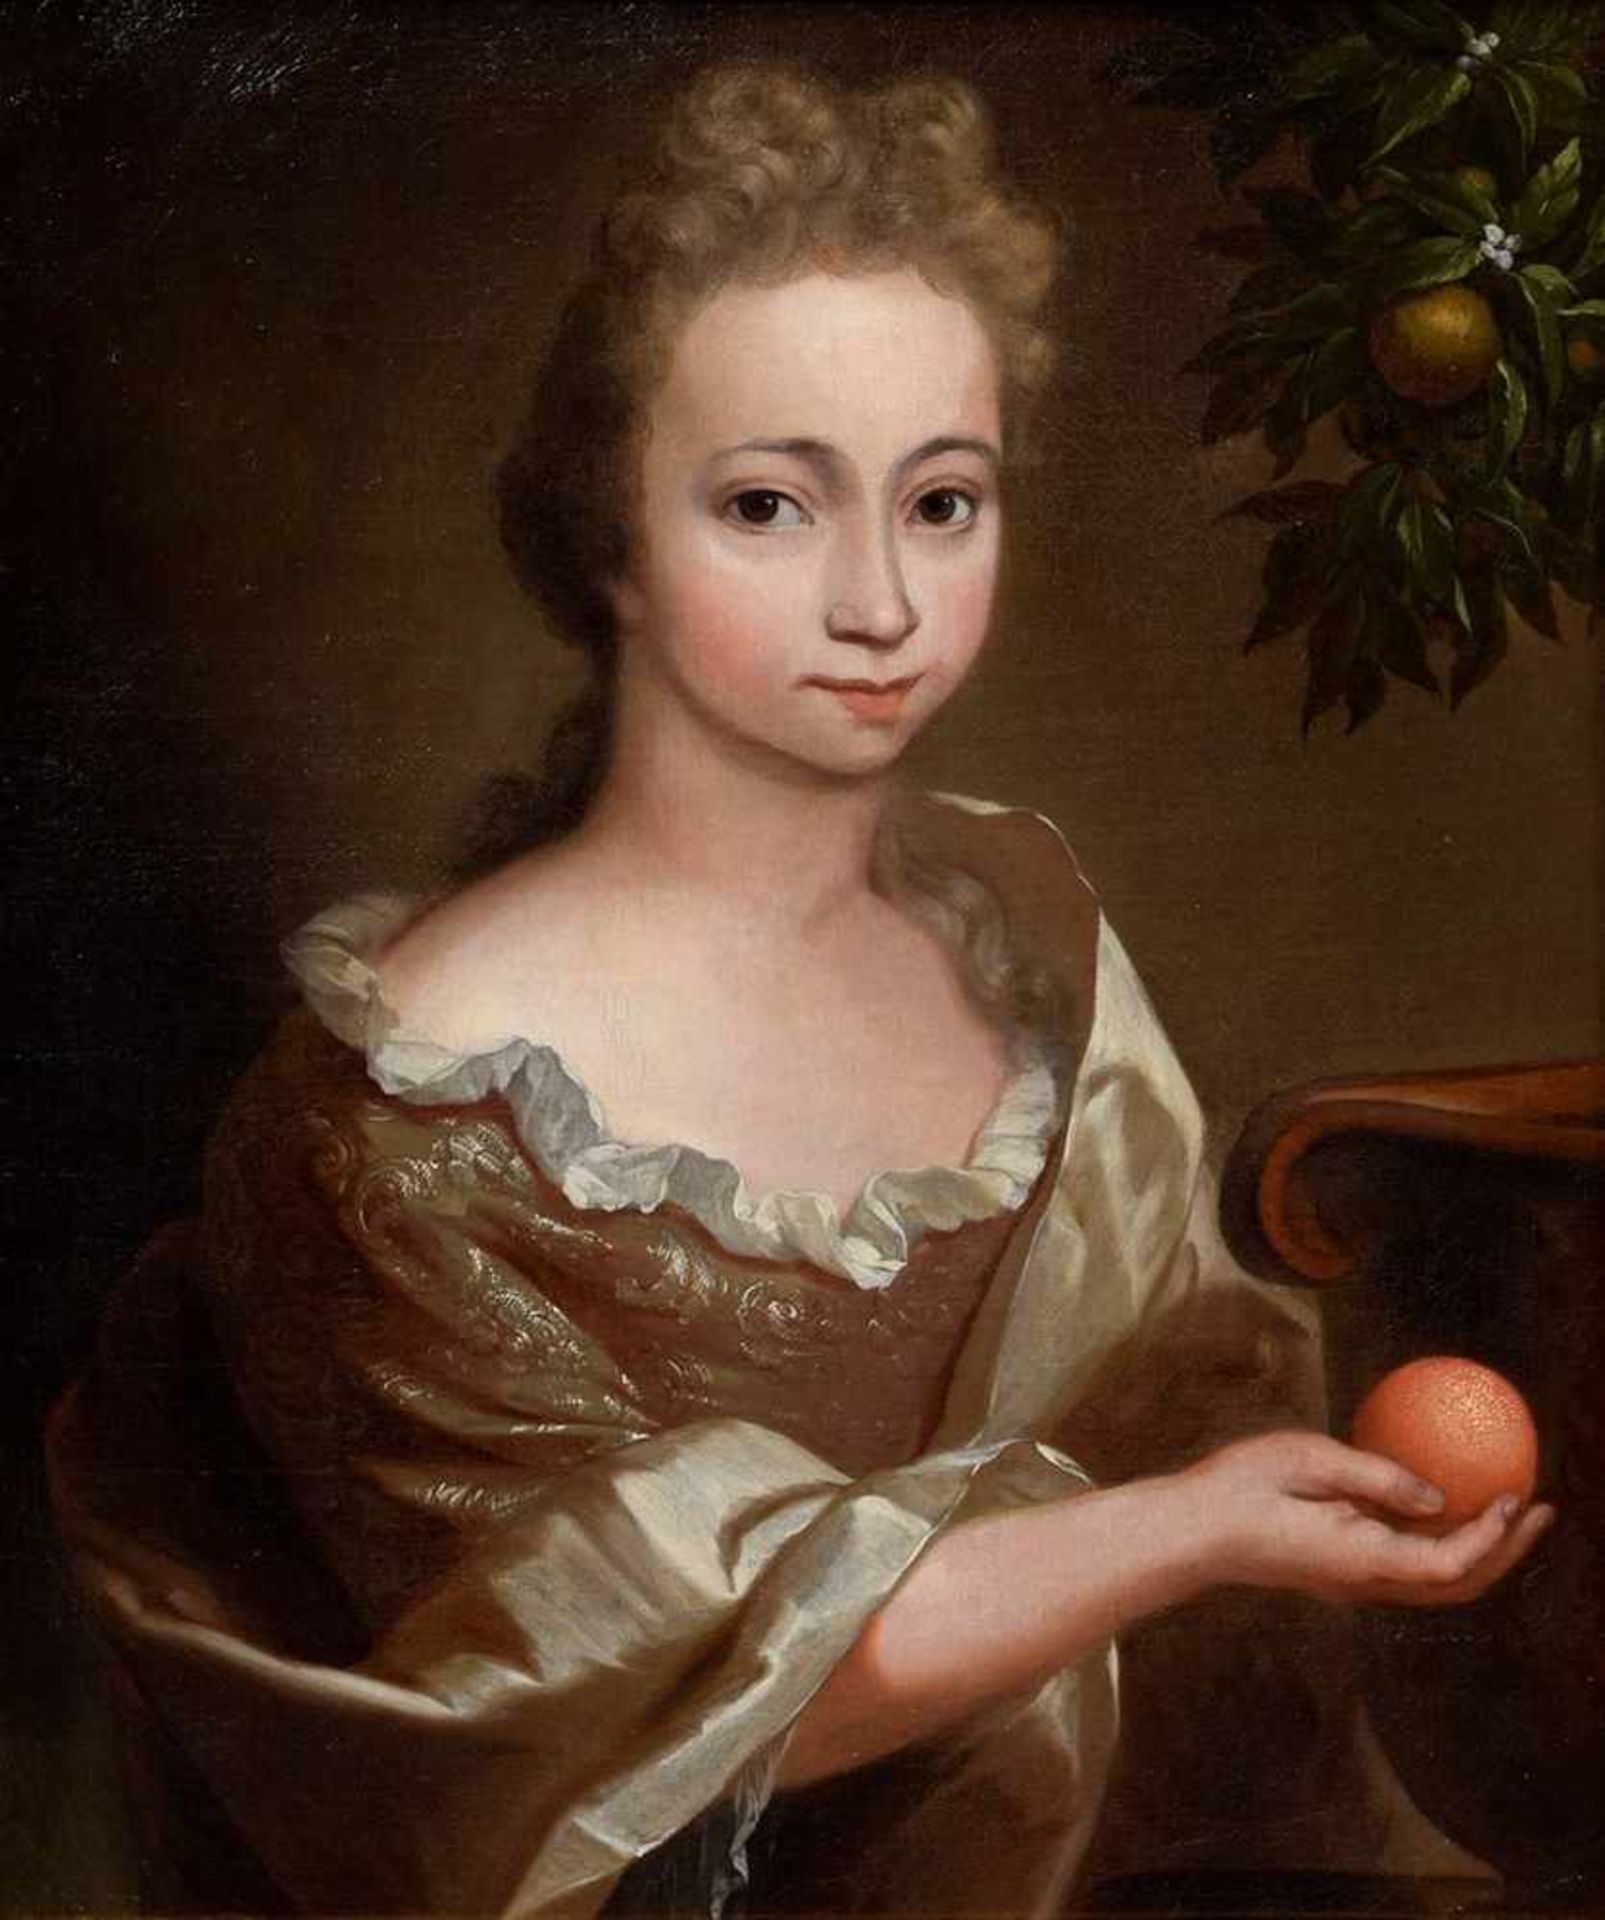 Unknown painter of the 18th century "Portrait of a girl with orange trees" probably Louise